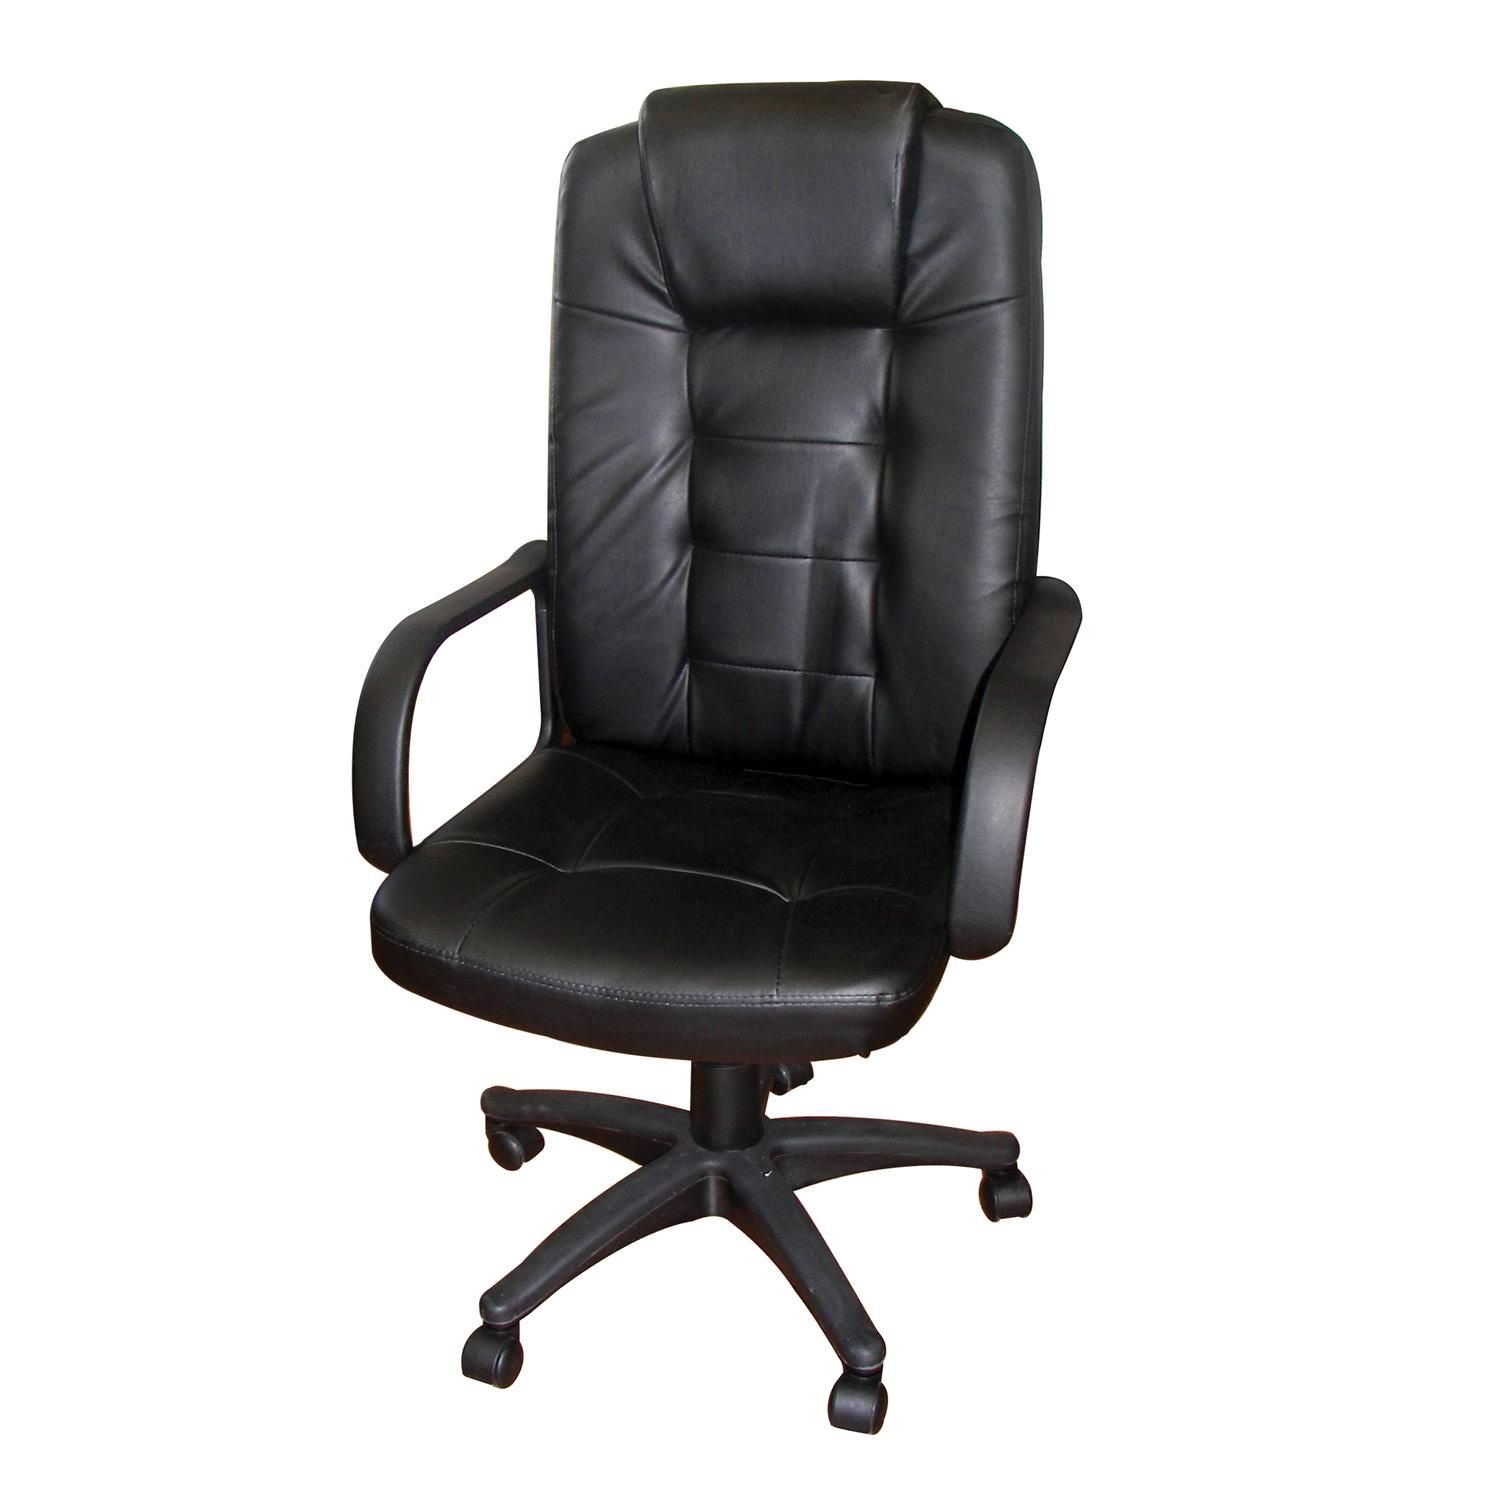 Home Source Bradley Black Faux Leather Swivel Office Chair With 5 Pertaining To Black Faux Leather Swivel Recliners (Gallery 19 of 20)